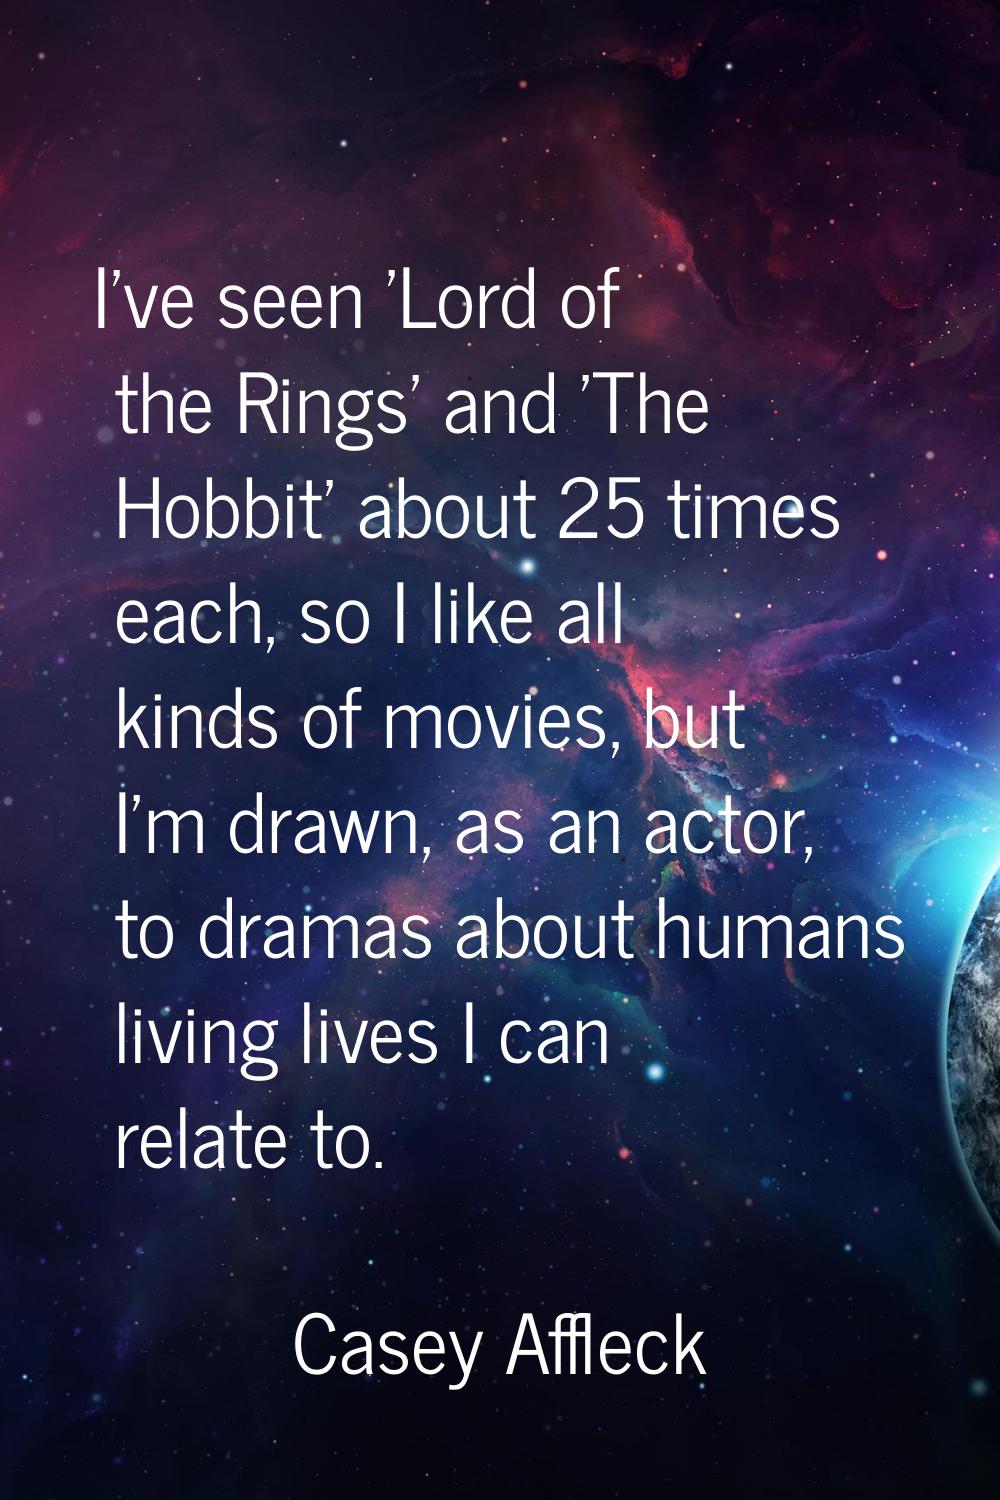 I've seen 'Lord of the Rings' and 'The Hobbit' about 25 times each, so I like all kinds of movies, 